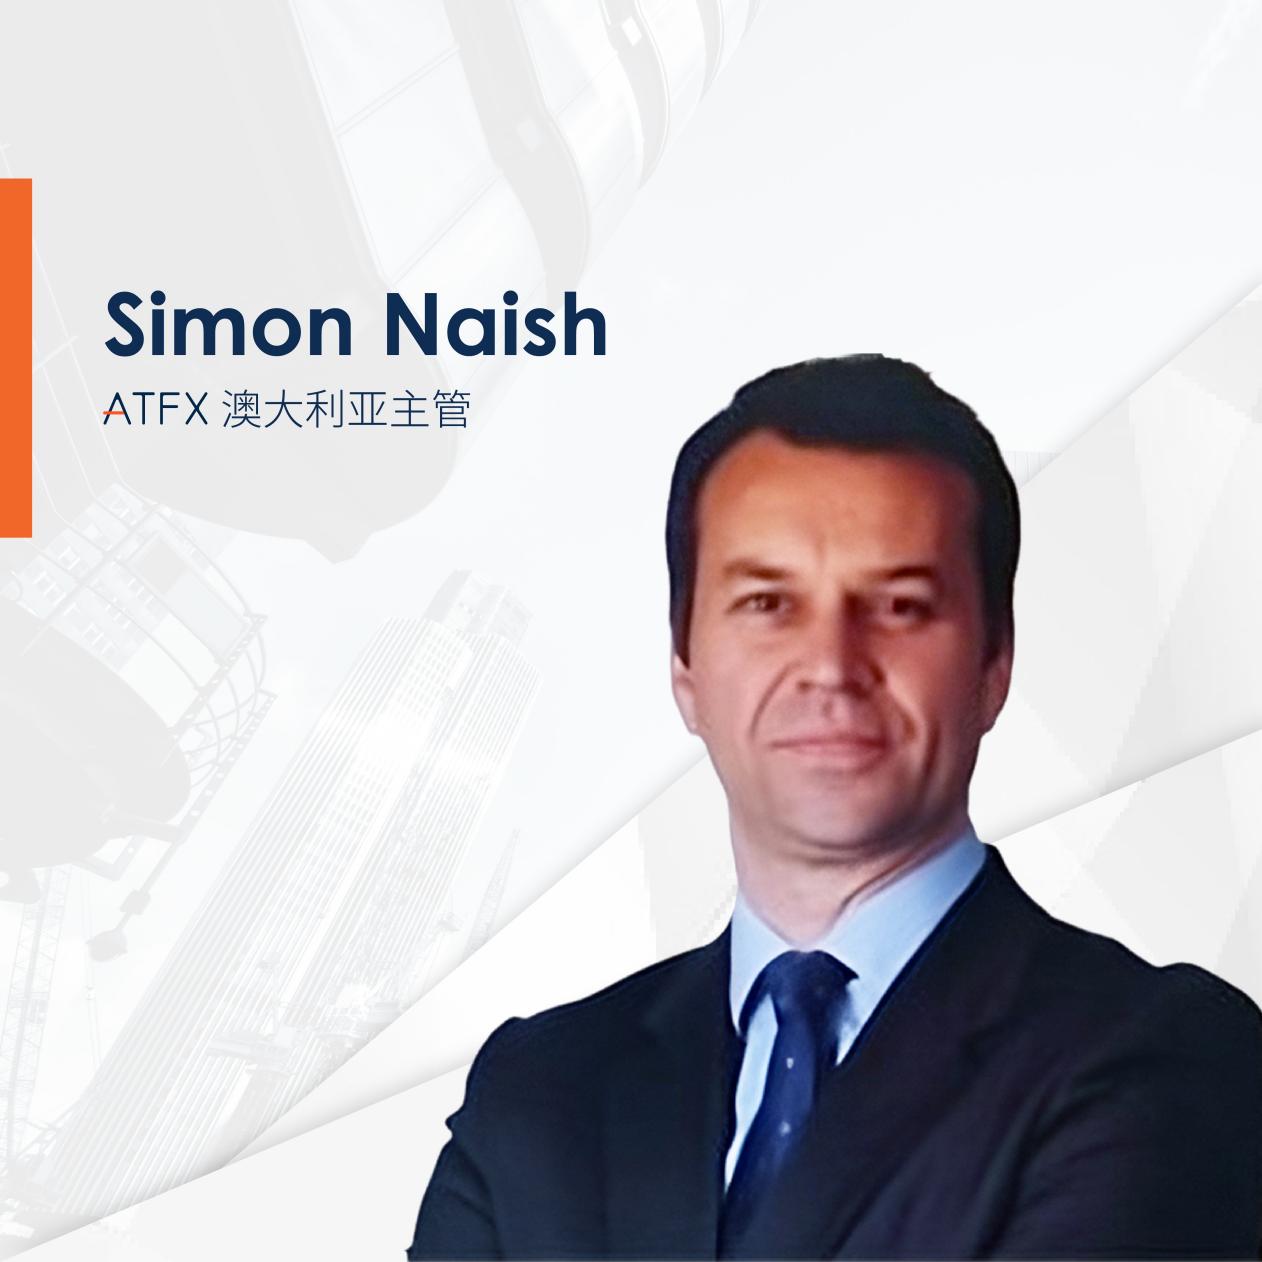 ATFXwelcomeSimon NaishJoining and leading a new chapter of business in the Australian market694 / author:atfx2019 / PostsID:1726857